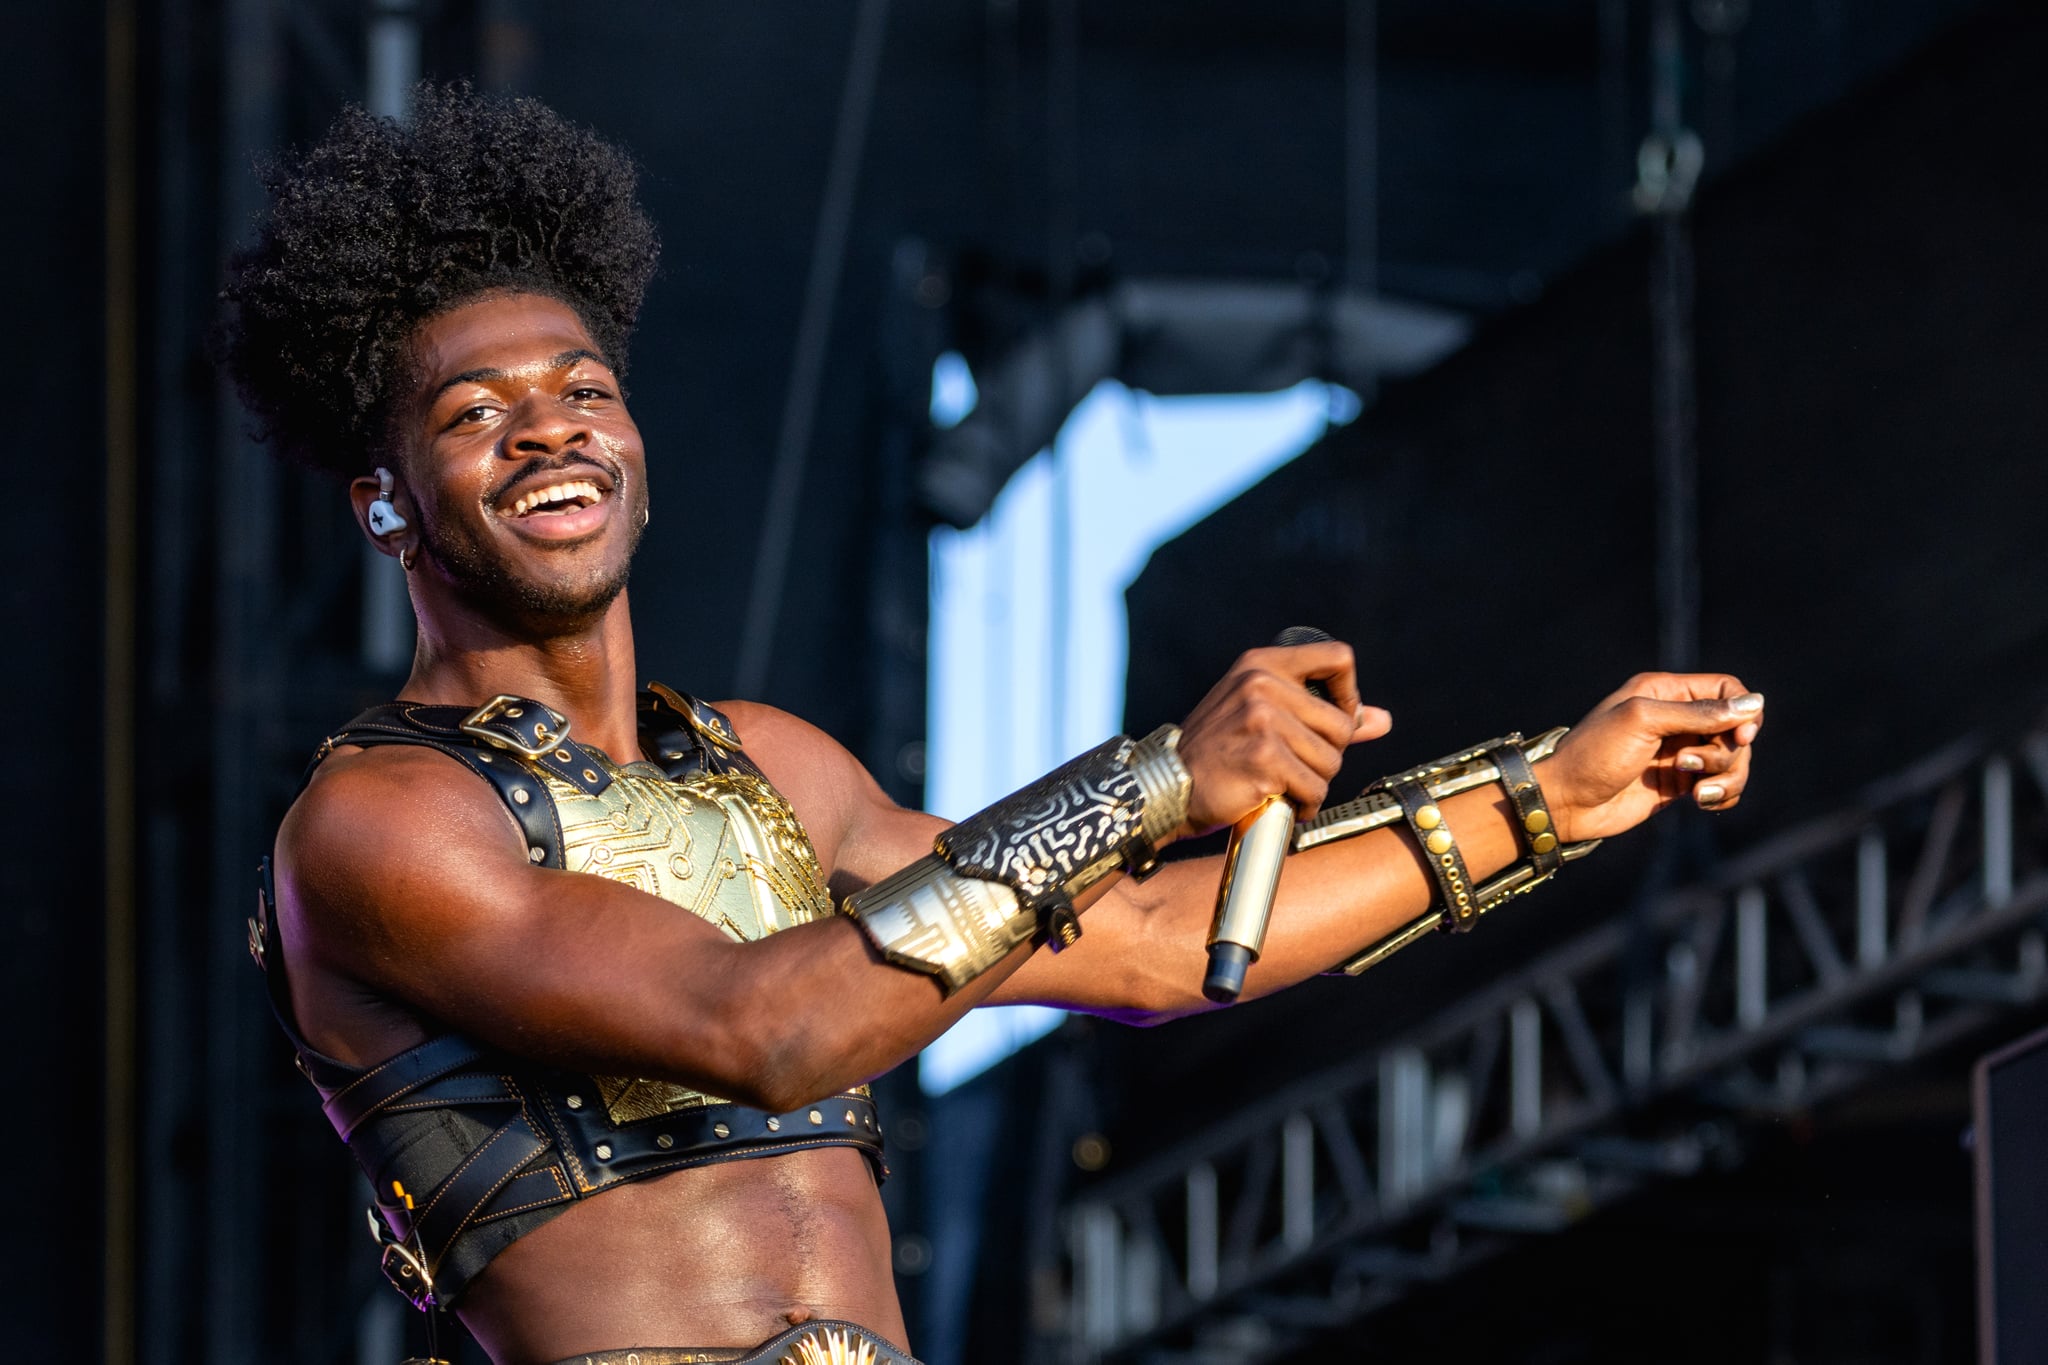 Lil Nas X Reveals He’s Already Writing His Next Album: “I’m in This Really Interesting Pocket”